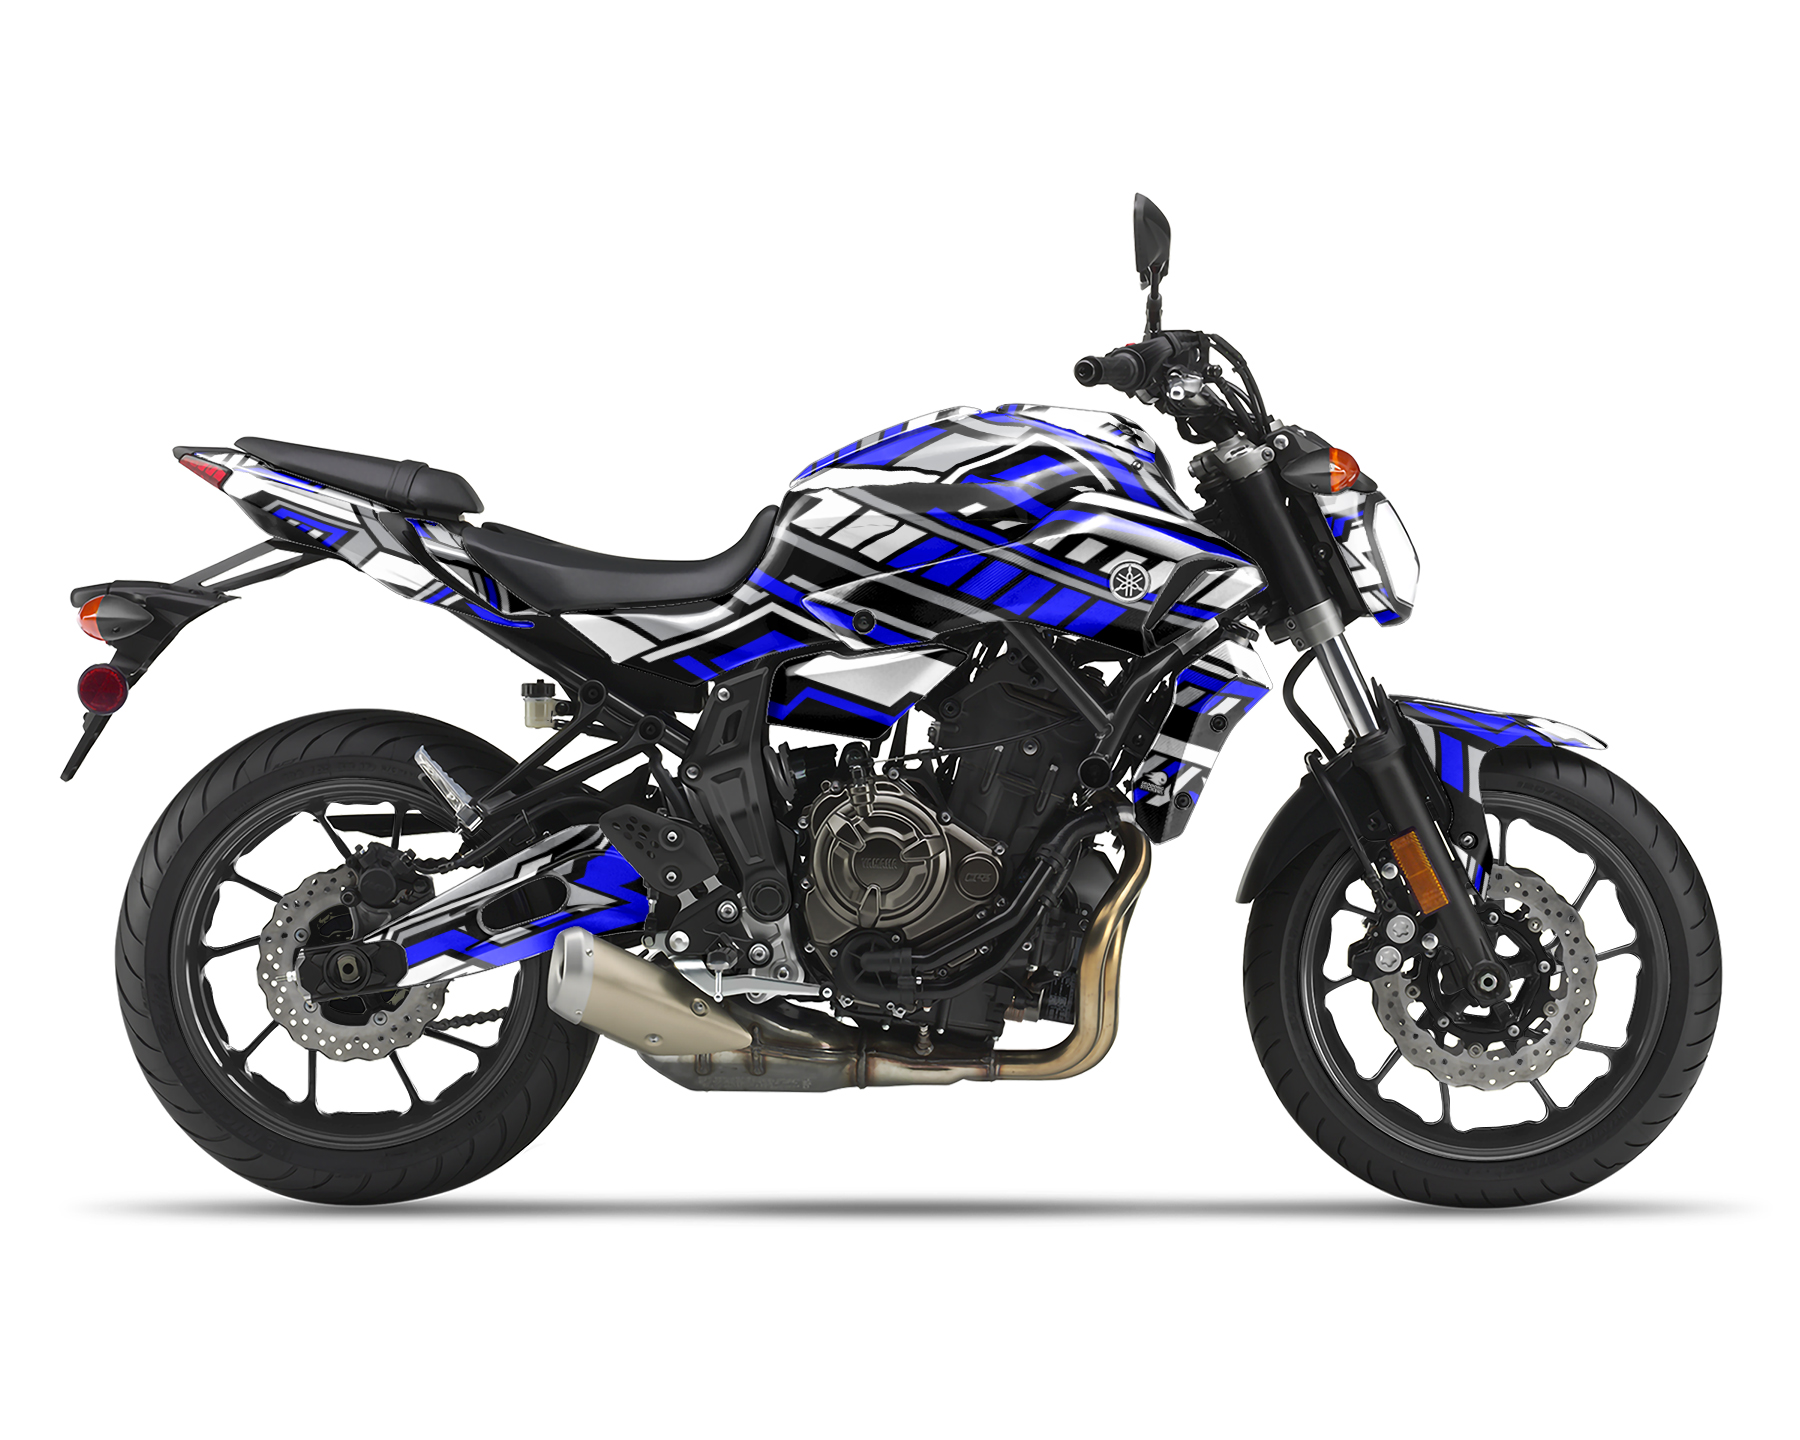 Yamaha MT-07 Motorcycle with blue and white fairing stickers